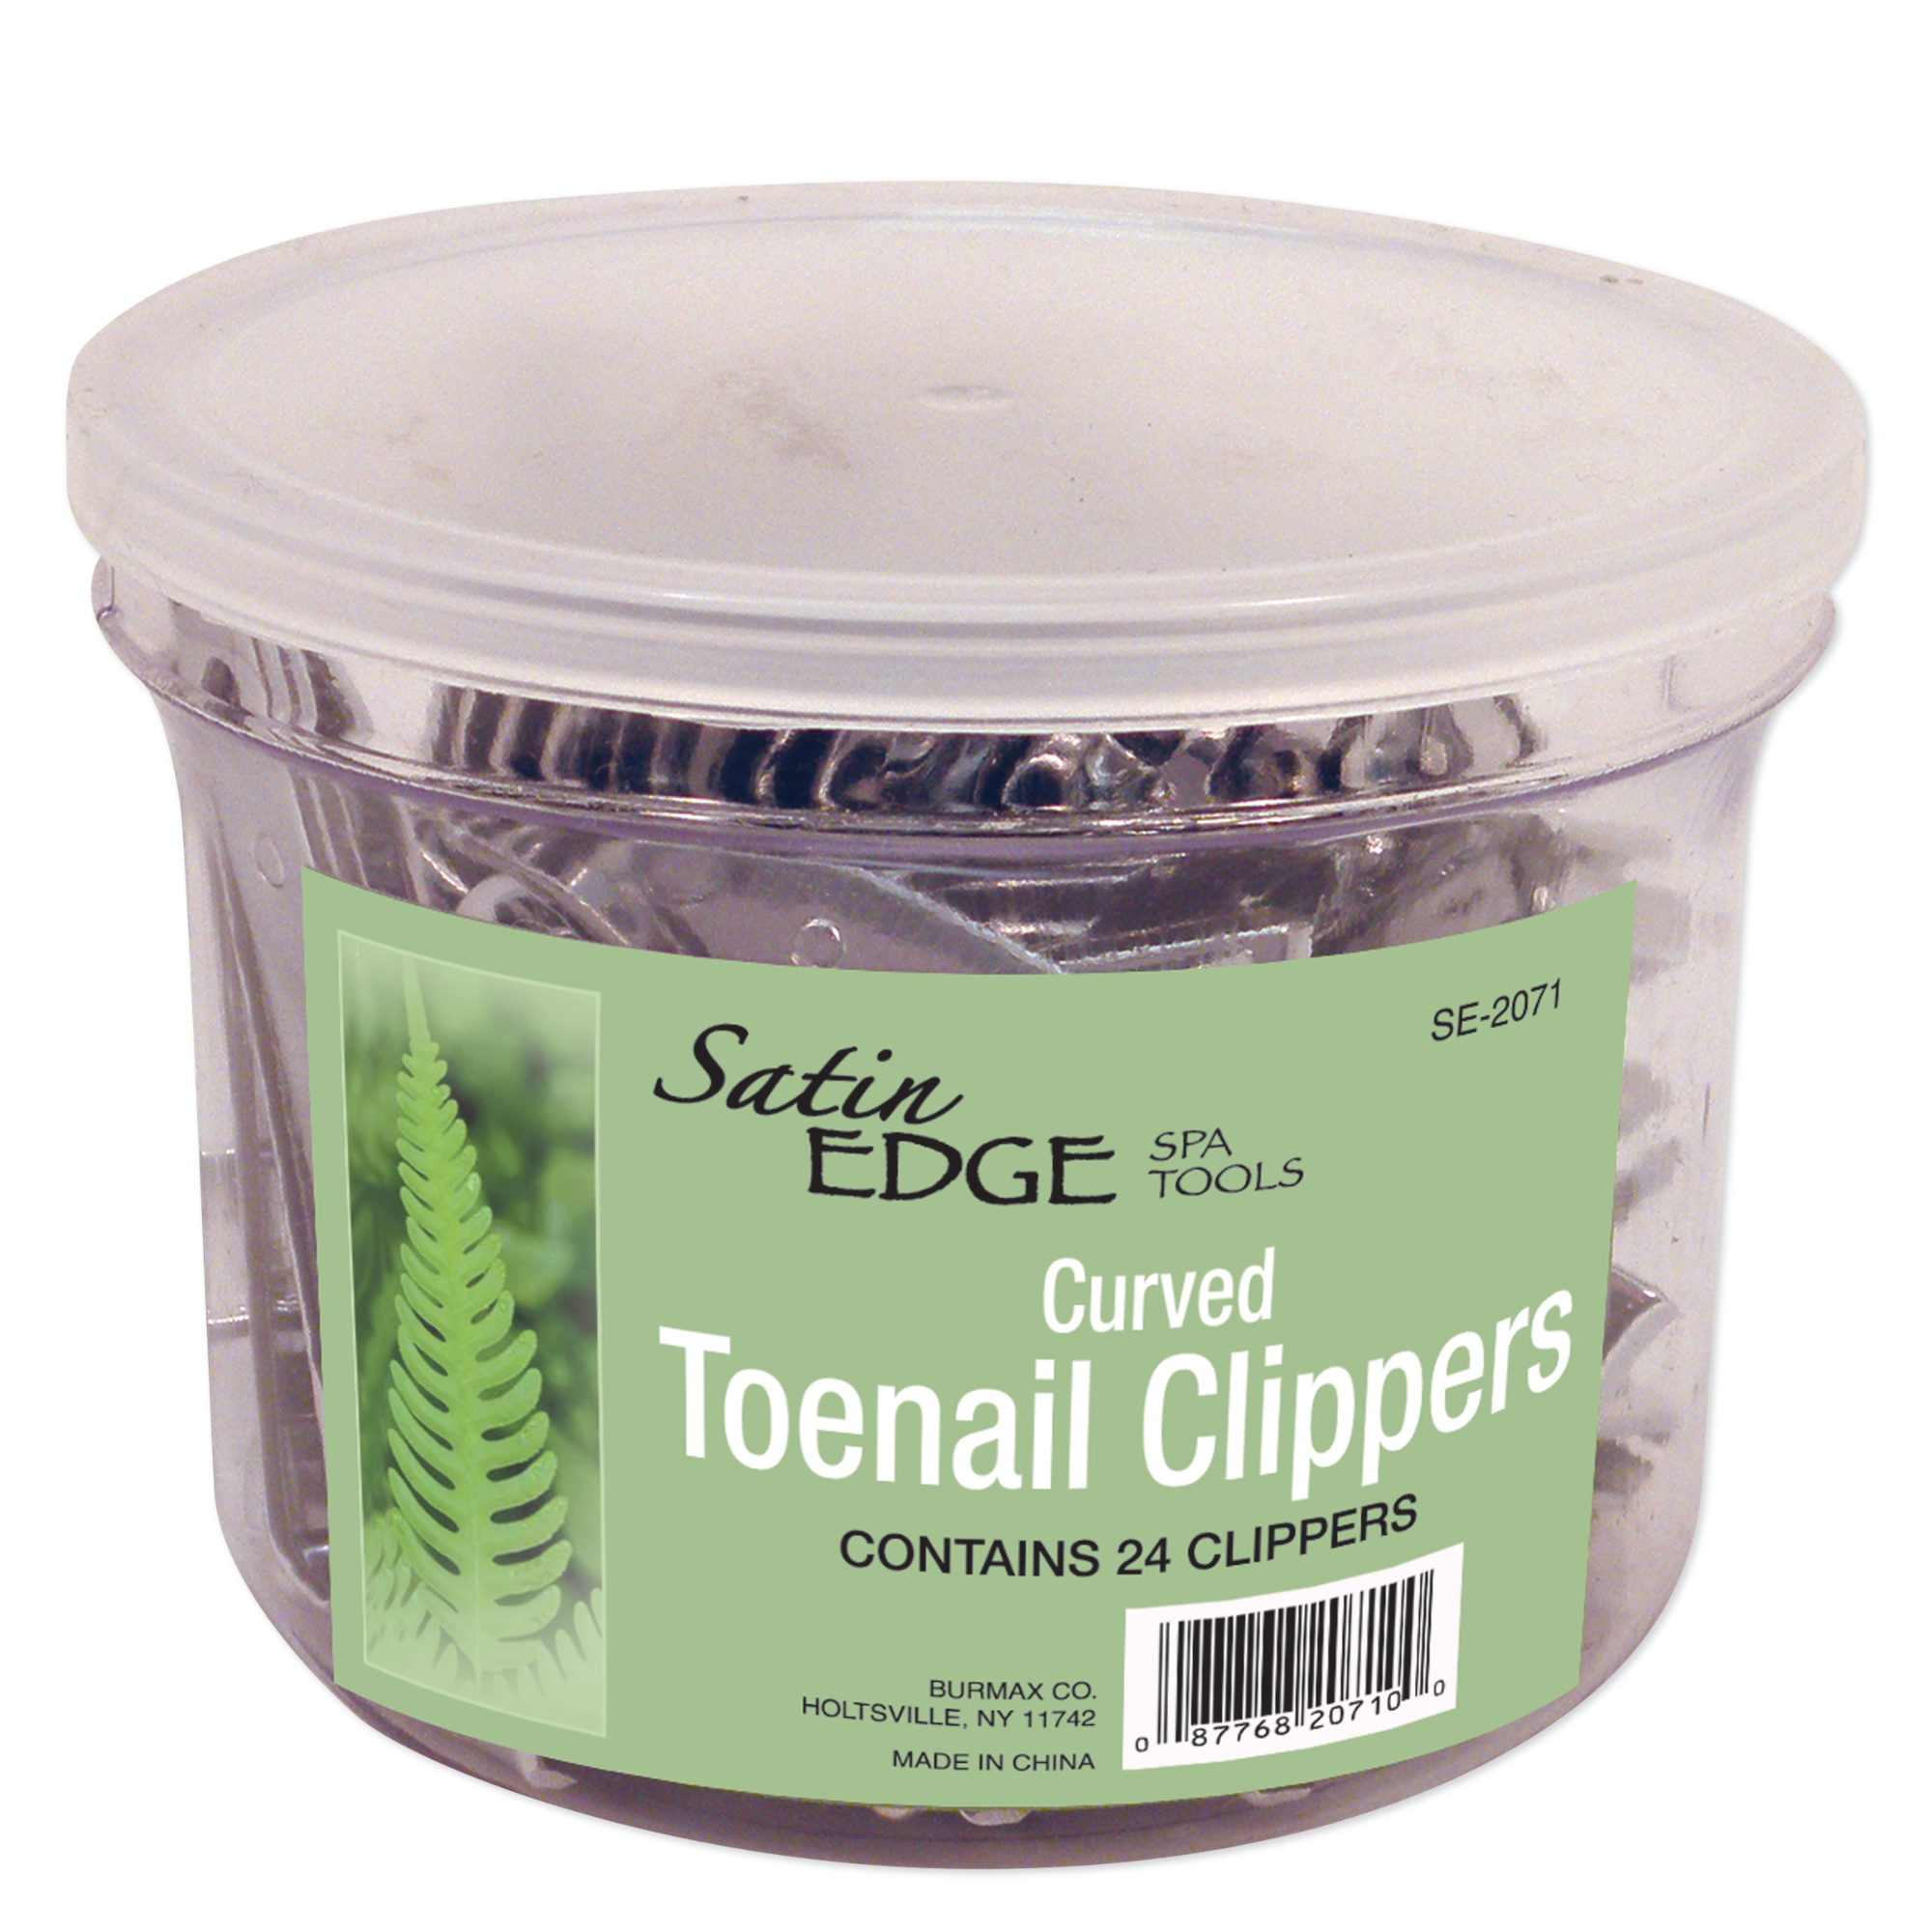 Toenail Clippers, Curved Blade - Container of 24